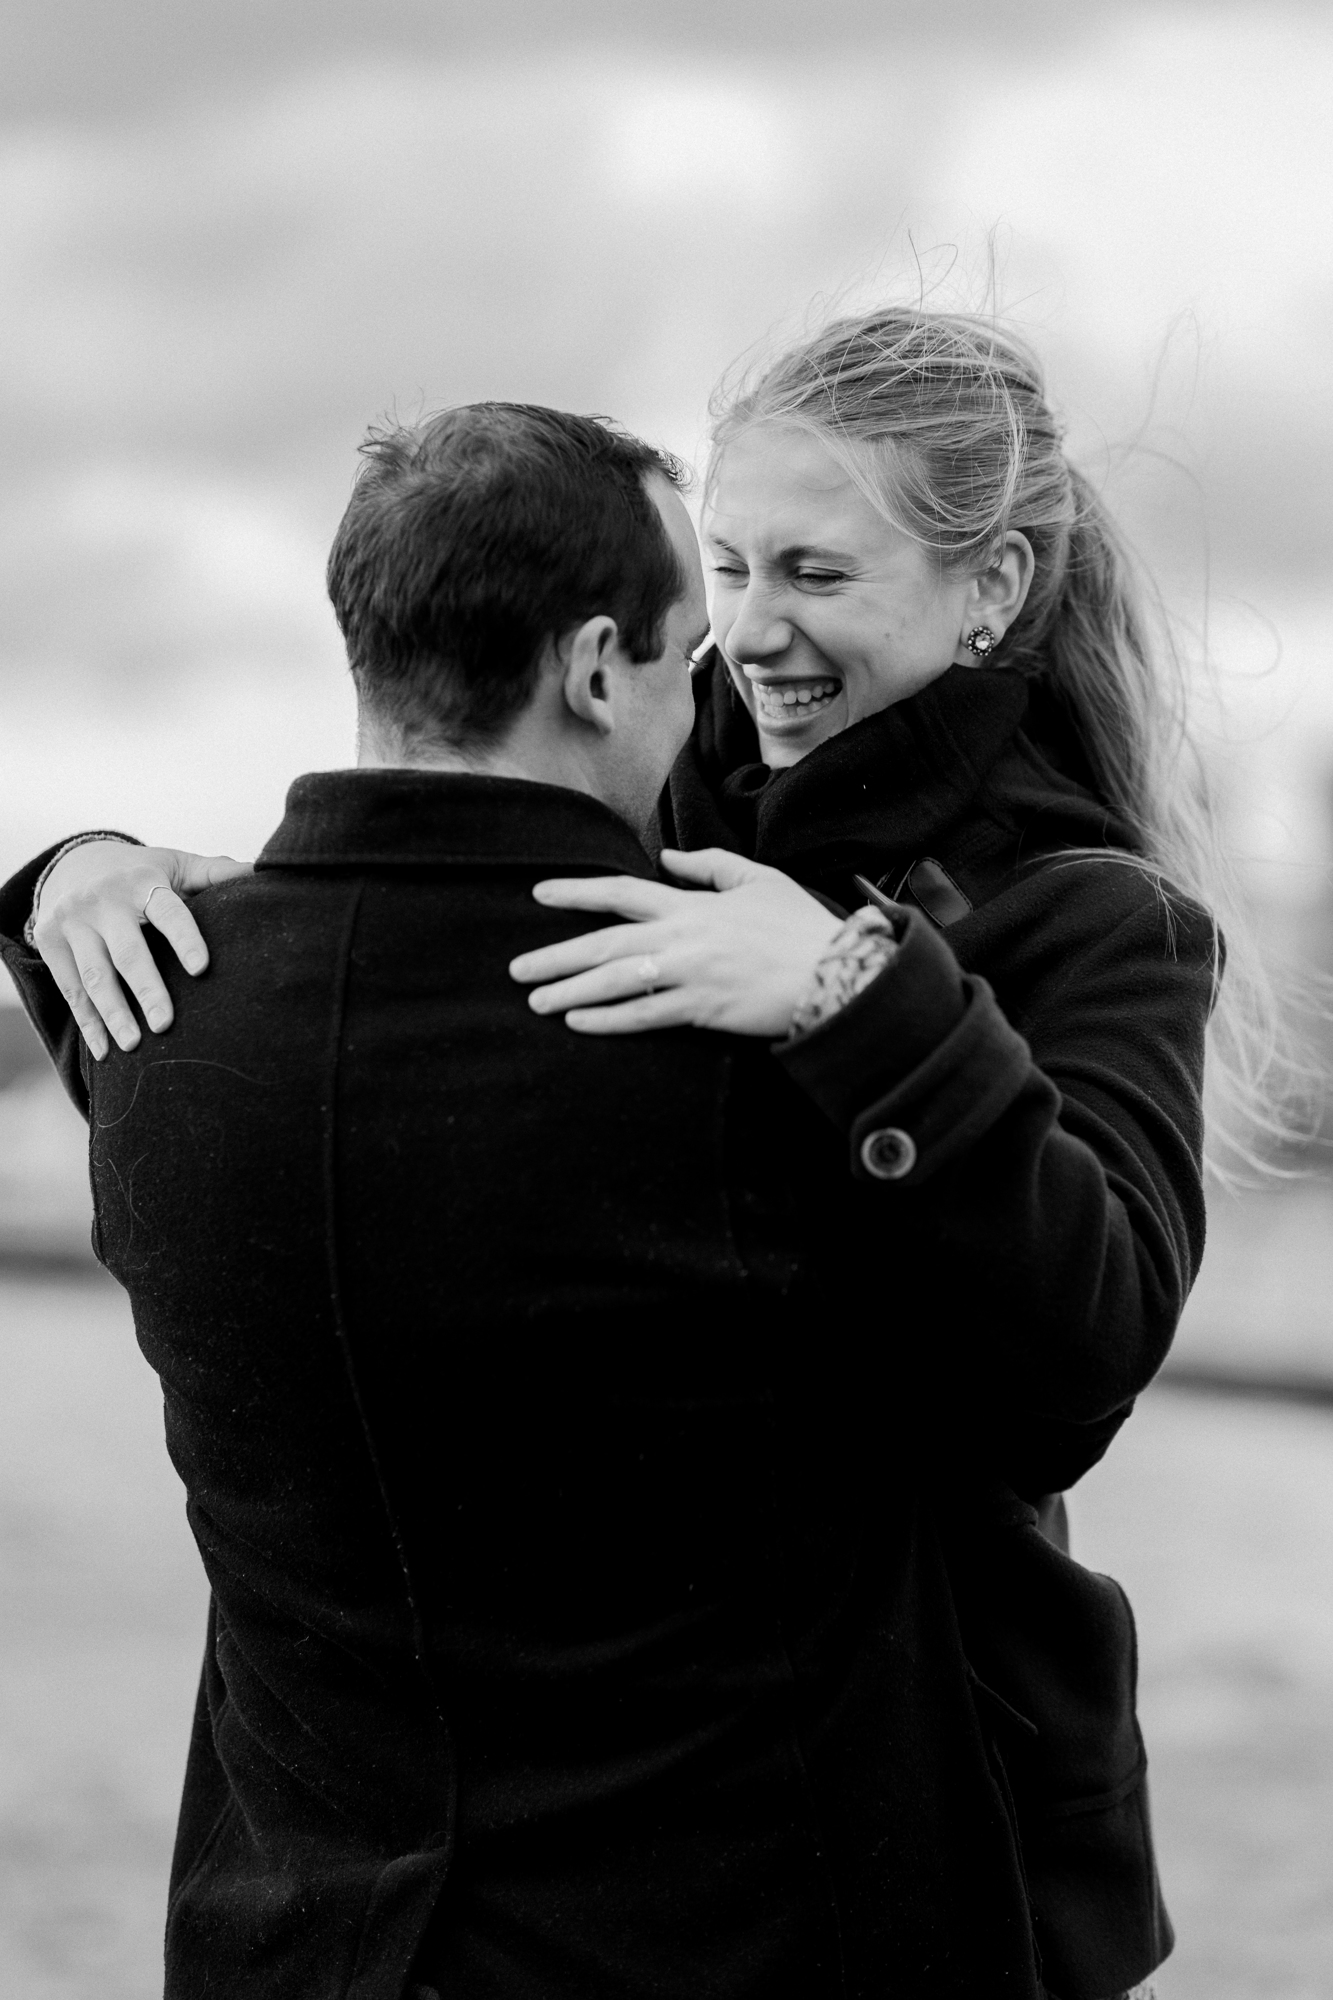 Beautiful Wintery Proposal at Transmitter Park in Greenpoint, Brooklyn